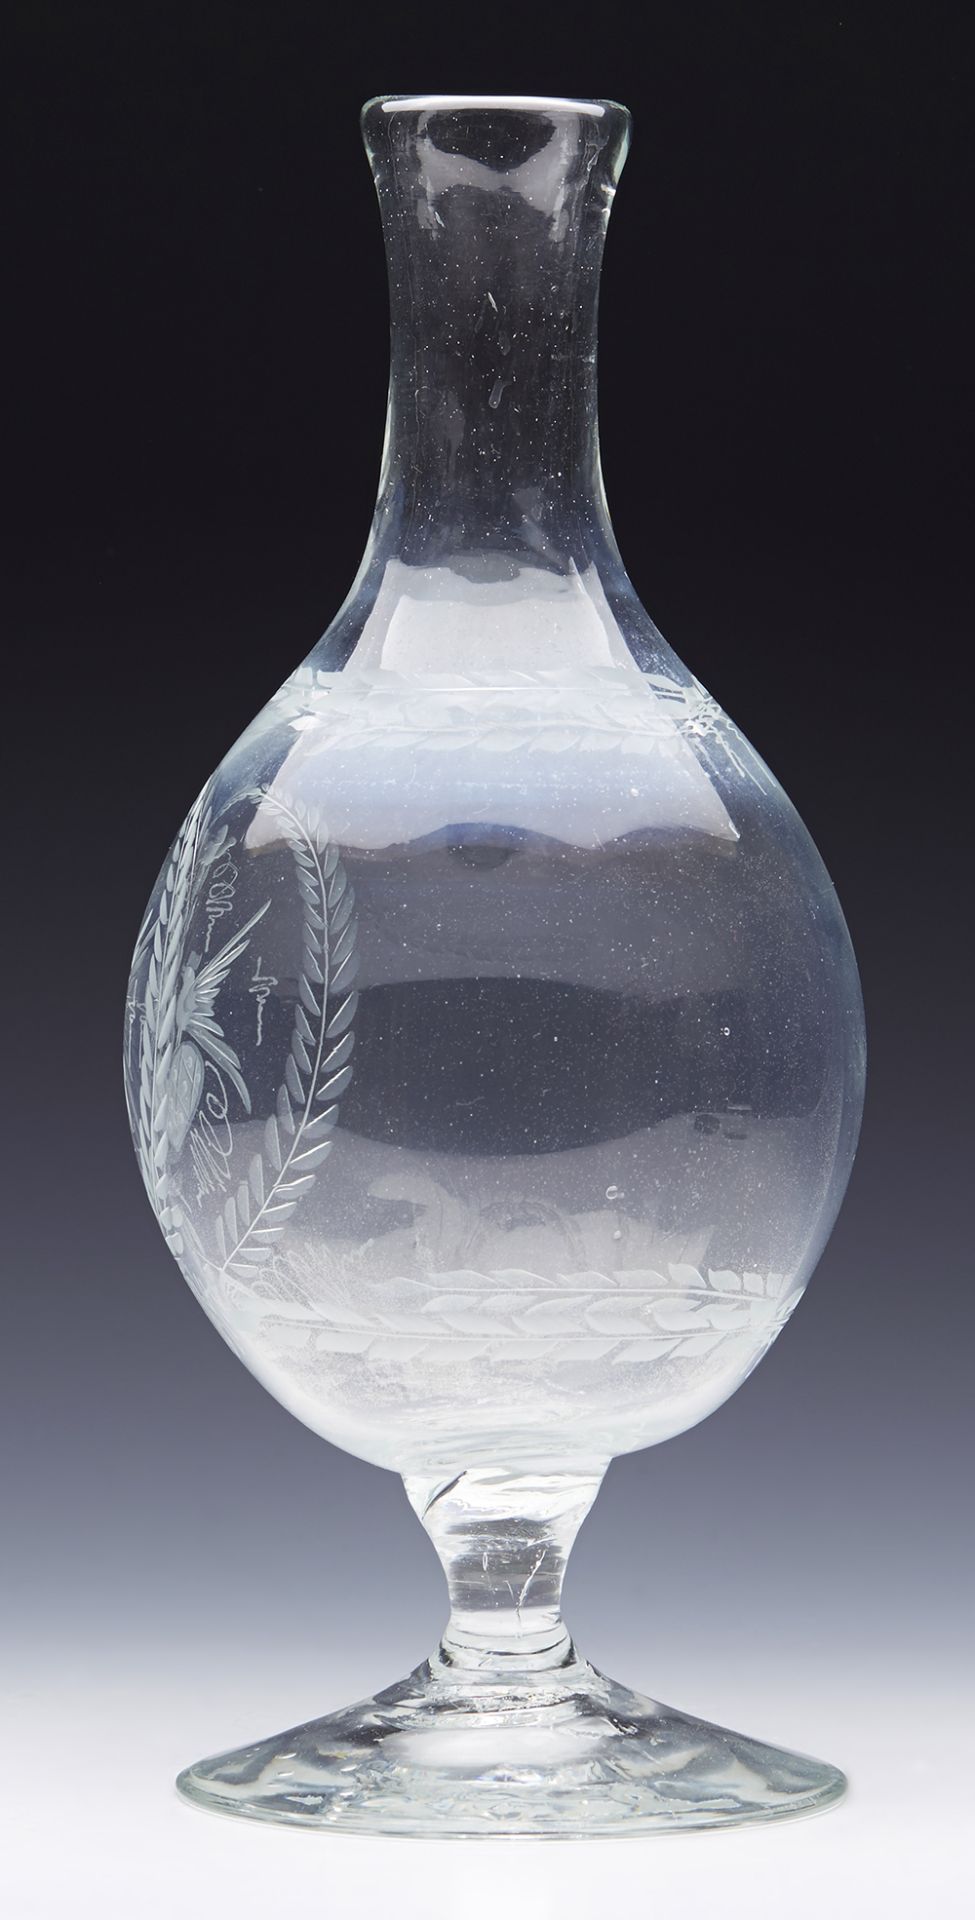 ANTIQUE GLASS MARRIAGE CARAFE ENGRAVED WITH LOVE BIRDS 19TH C. - Image 3 of 14